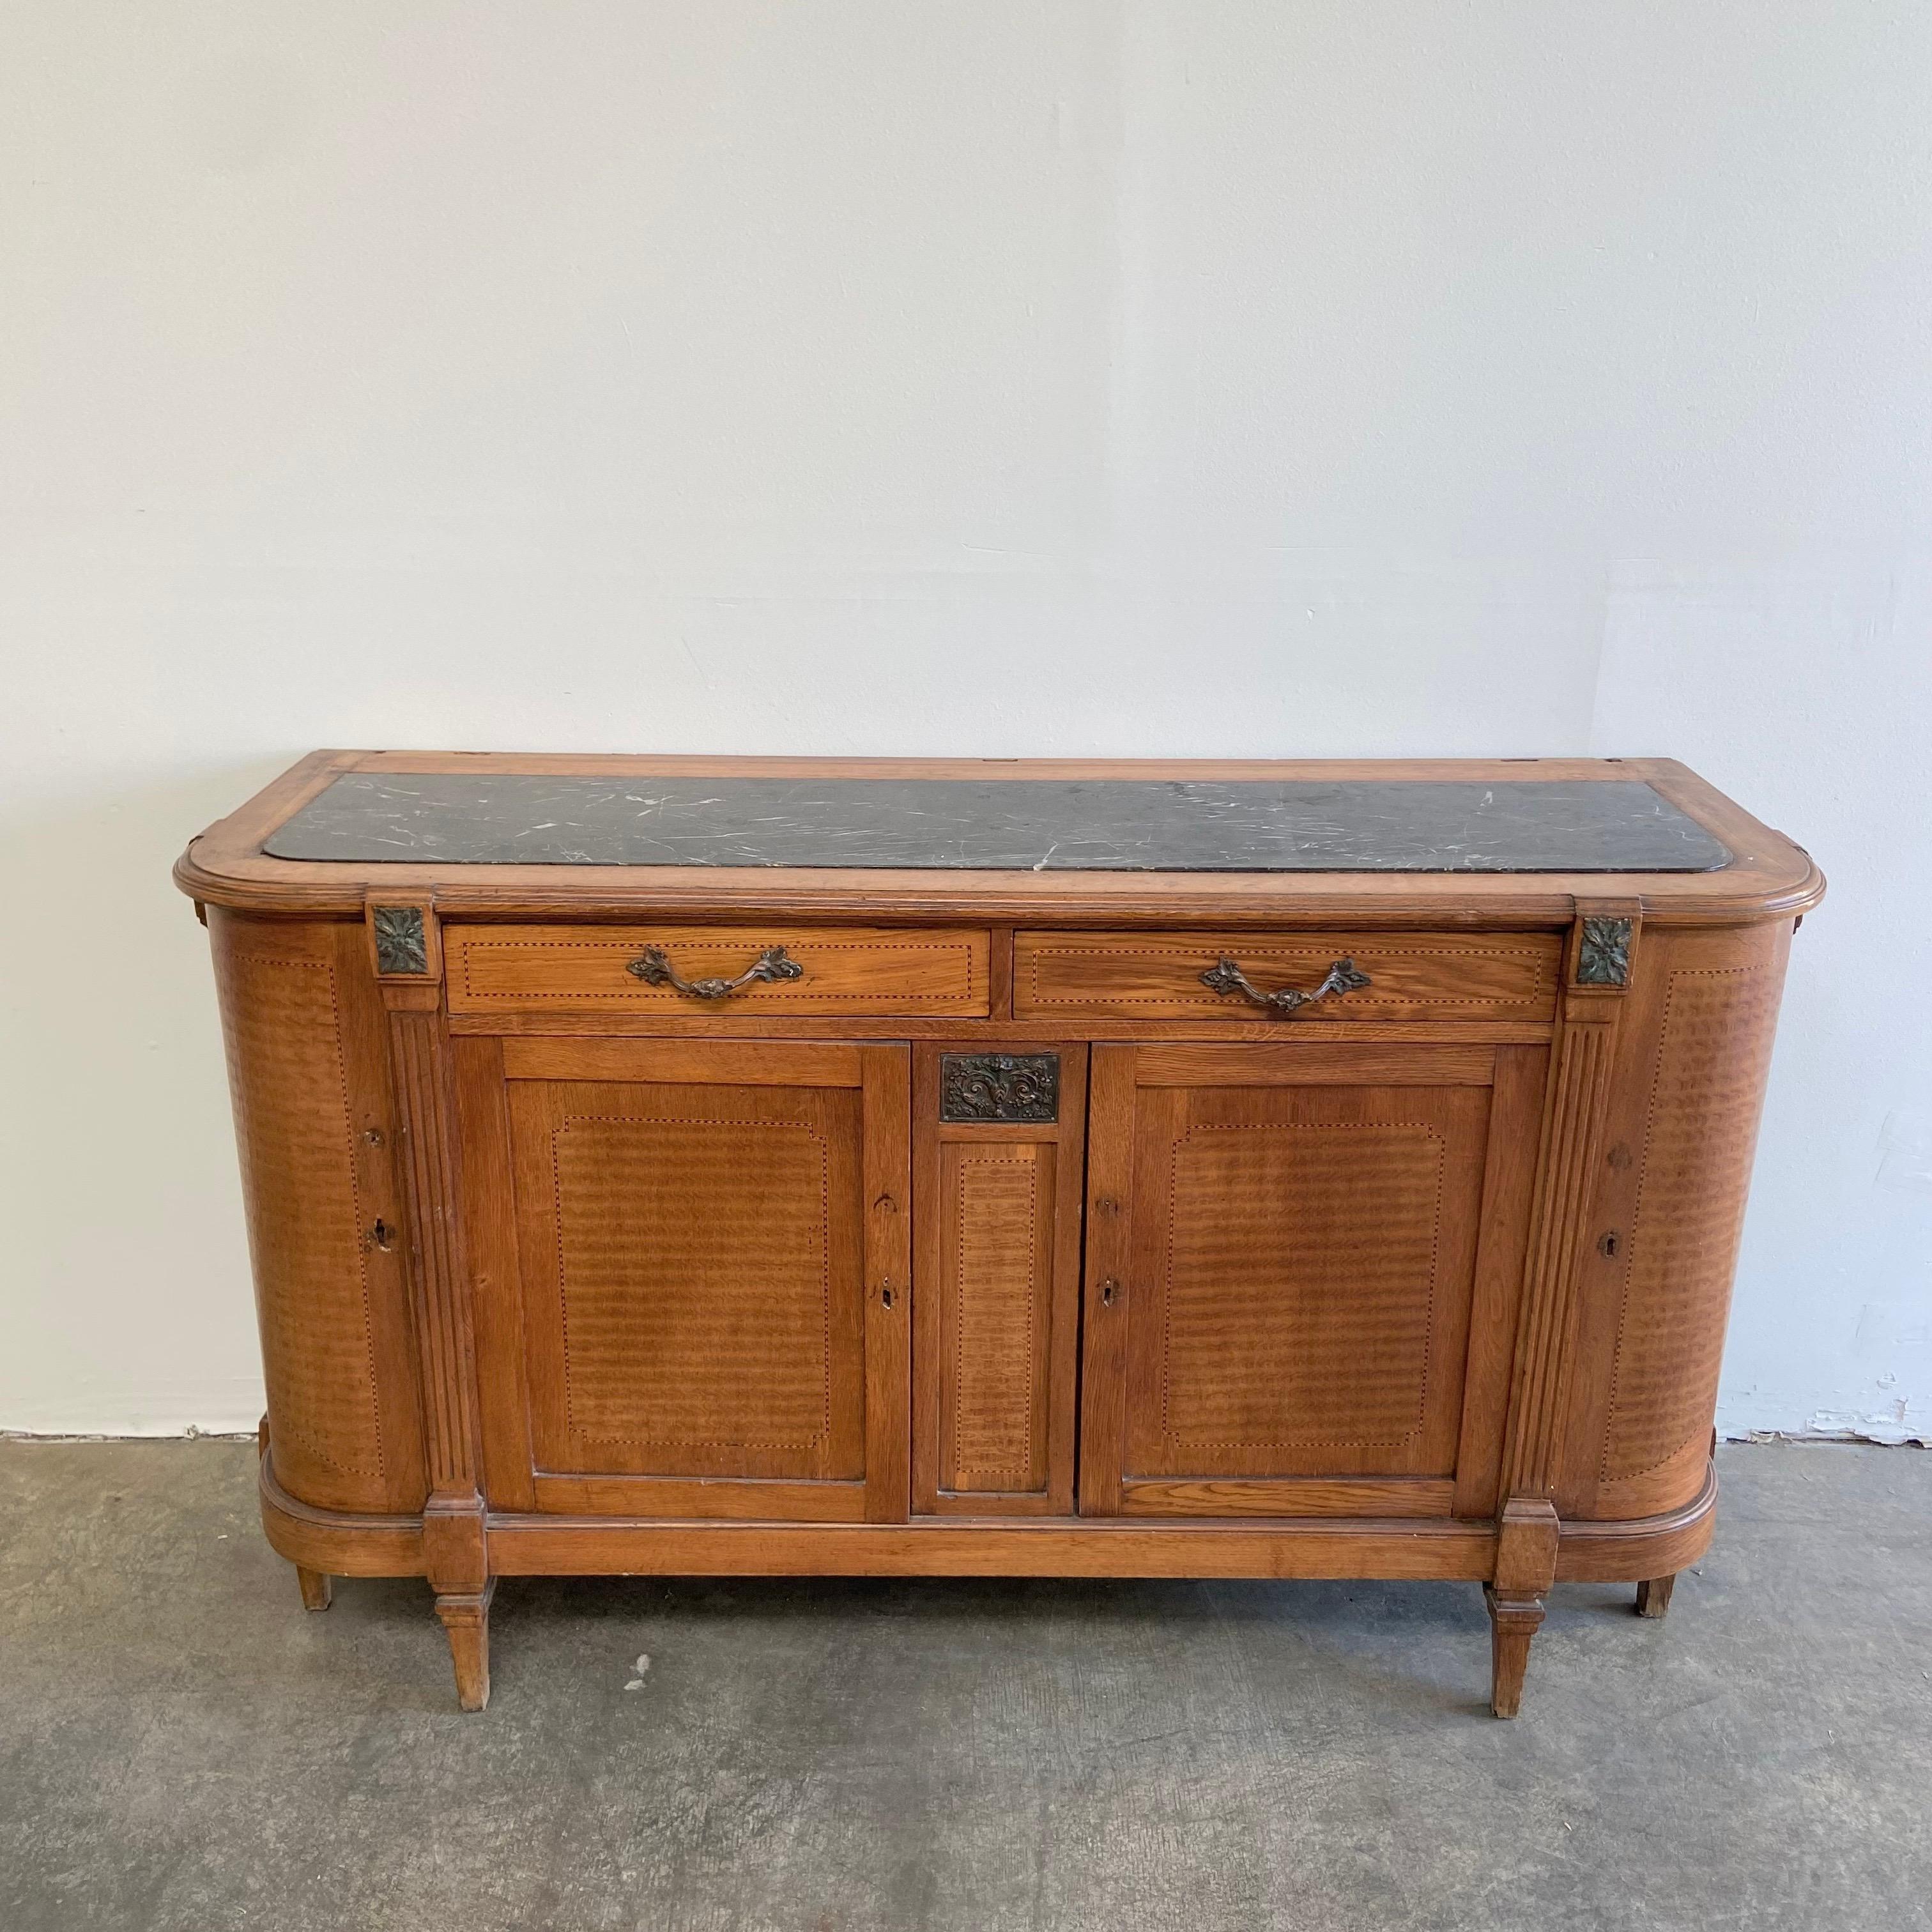 Antique Inlay fruitwood buffet with an art deco flair.
Marble top, with plenty of storage, inside features shelving, with side doors at the corner for more storage.
The top has 2 drawers that open and close with ease.
server measures: 67”W x 22”D